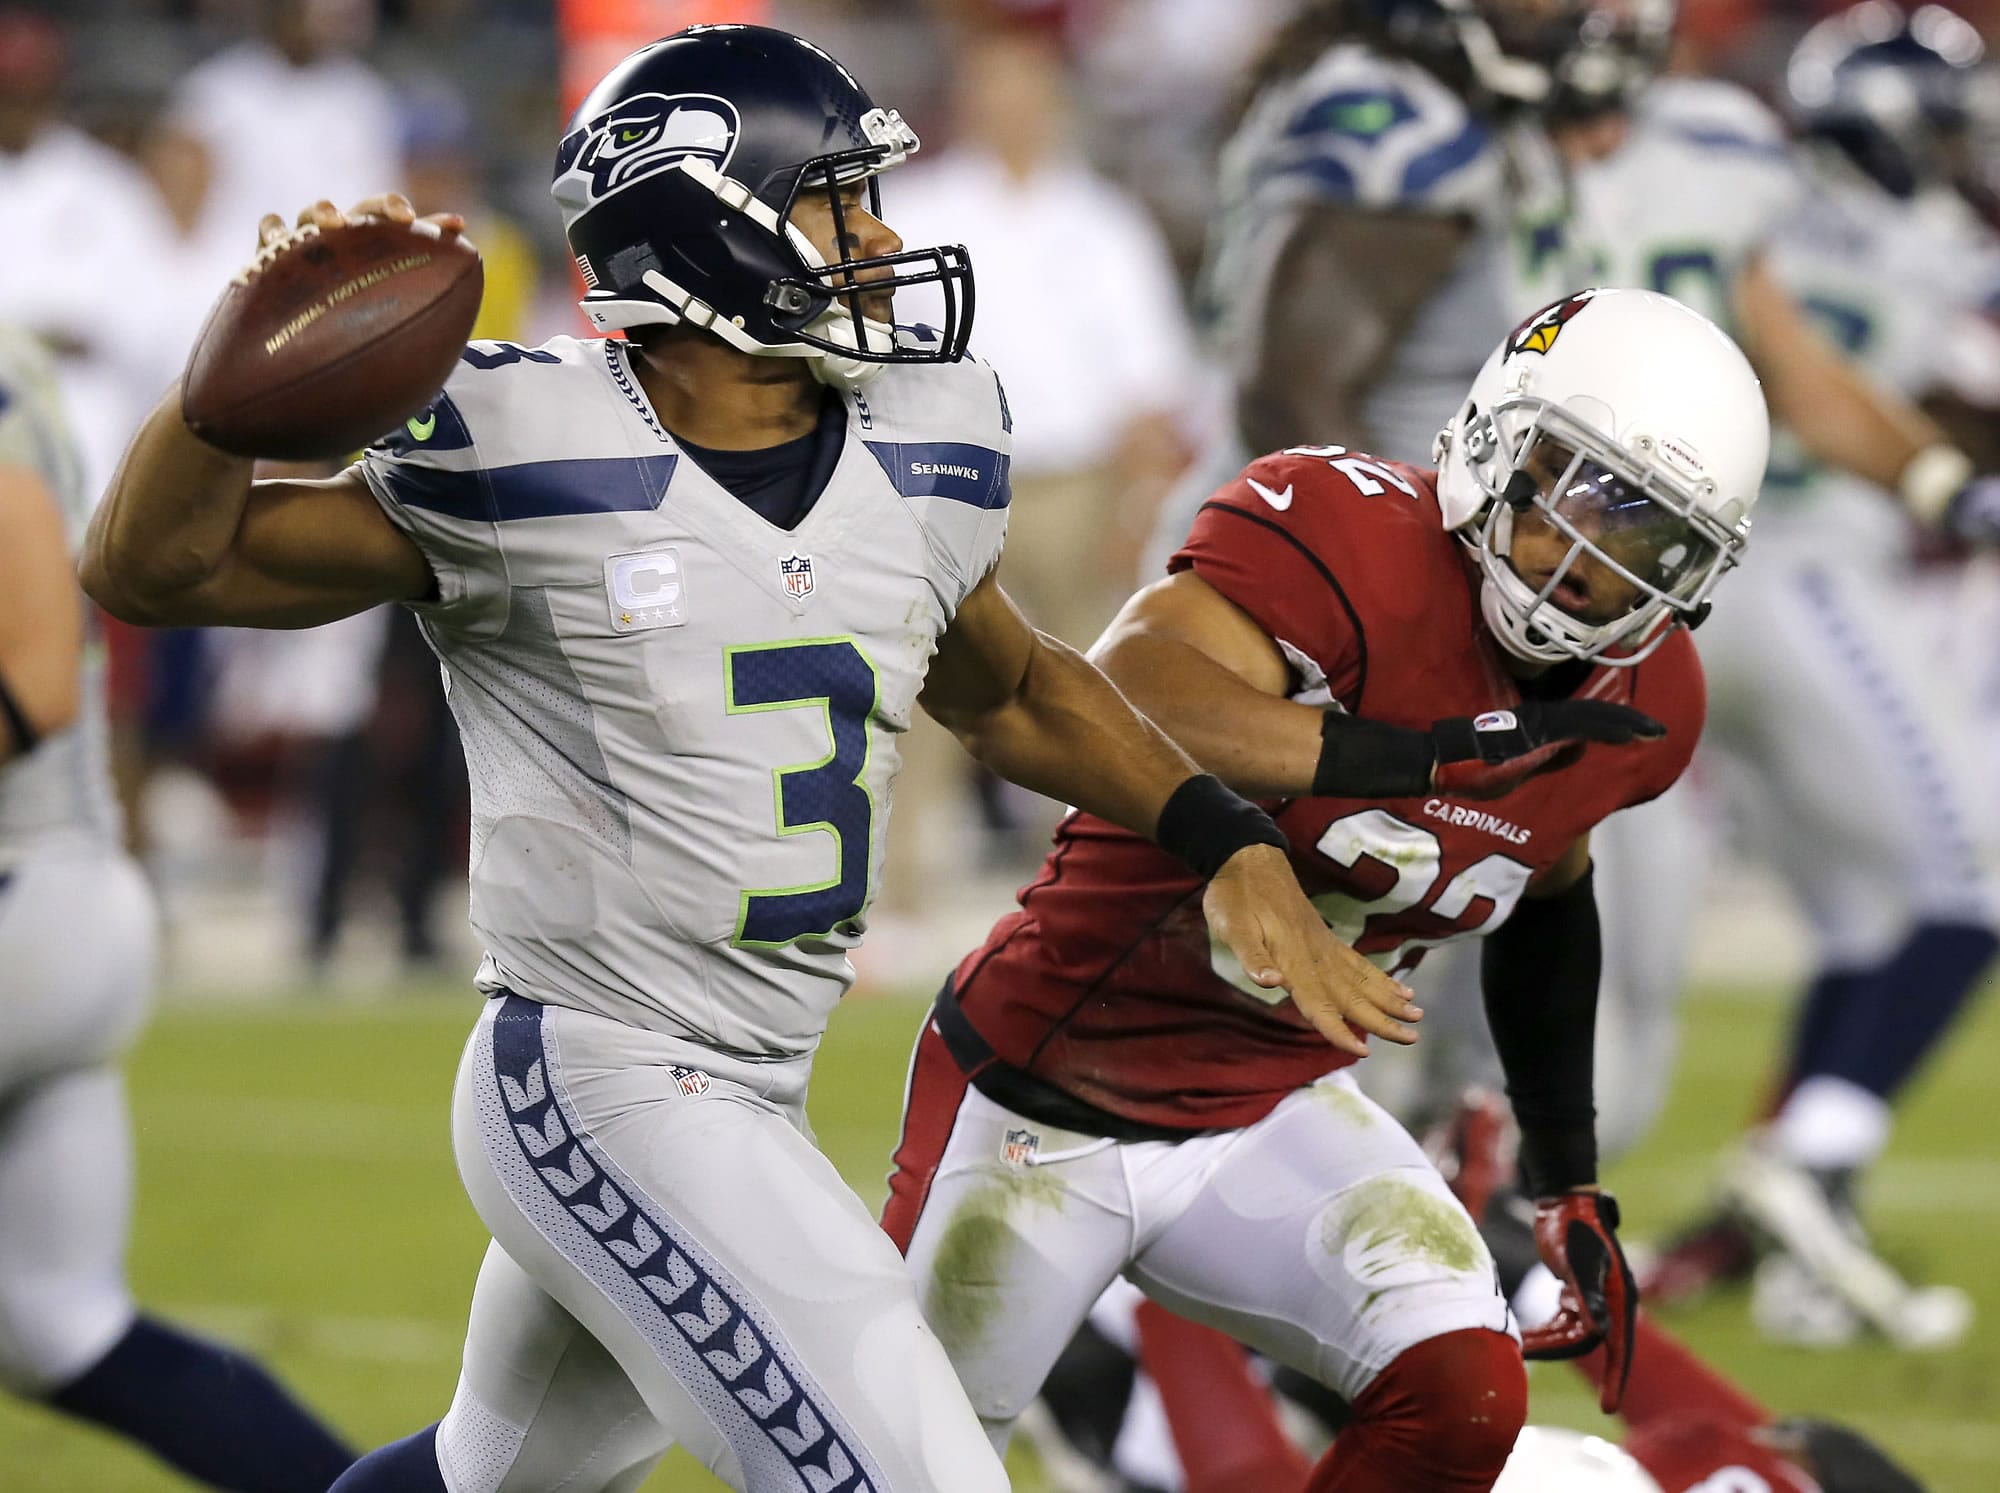 Seattle Seahawks quarterback Russell Wilson (3) scrambles as Arizona Cardinals free safety Tyrann Mathieu defends during the first half of an NFL football game, Thursday, Oct. 17, 2013, in Glendale, Ariz. (AP Photo/Ross D.